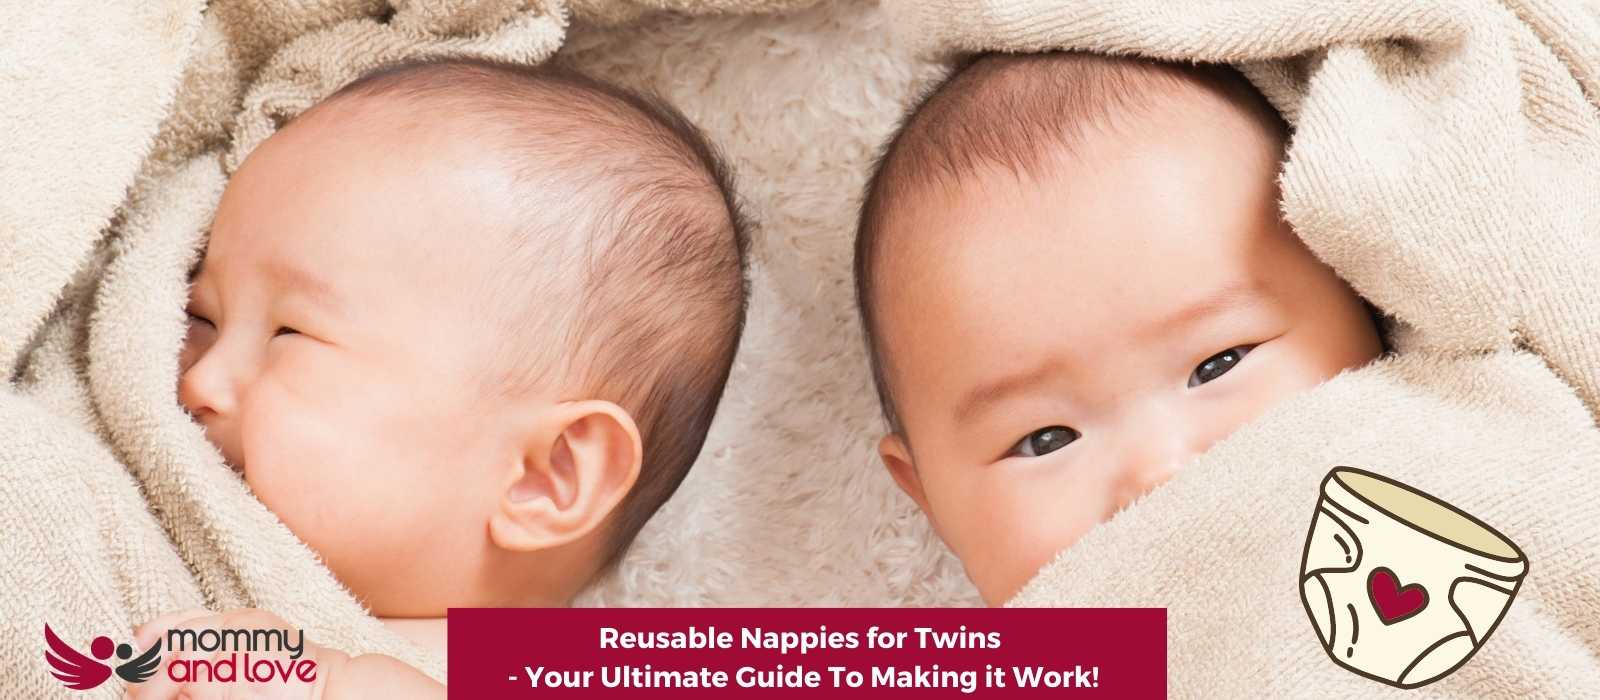 Reusable Nappies for Twins - Your Ultimate Guide To Making it Work!